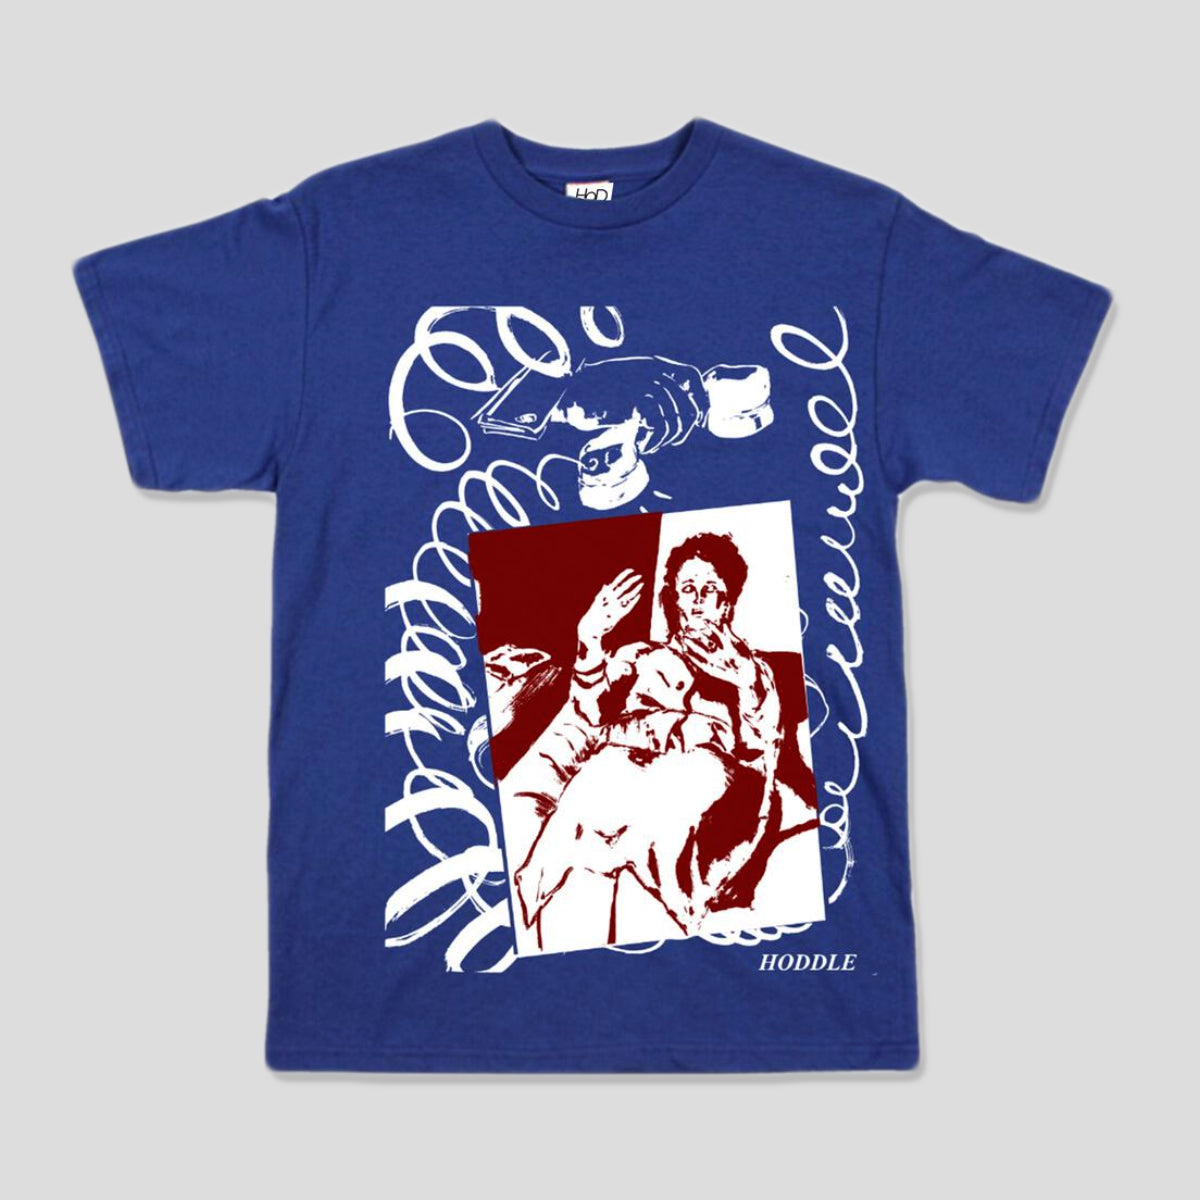 HODDLE "NELL" TEE BLUE